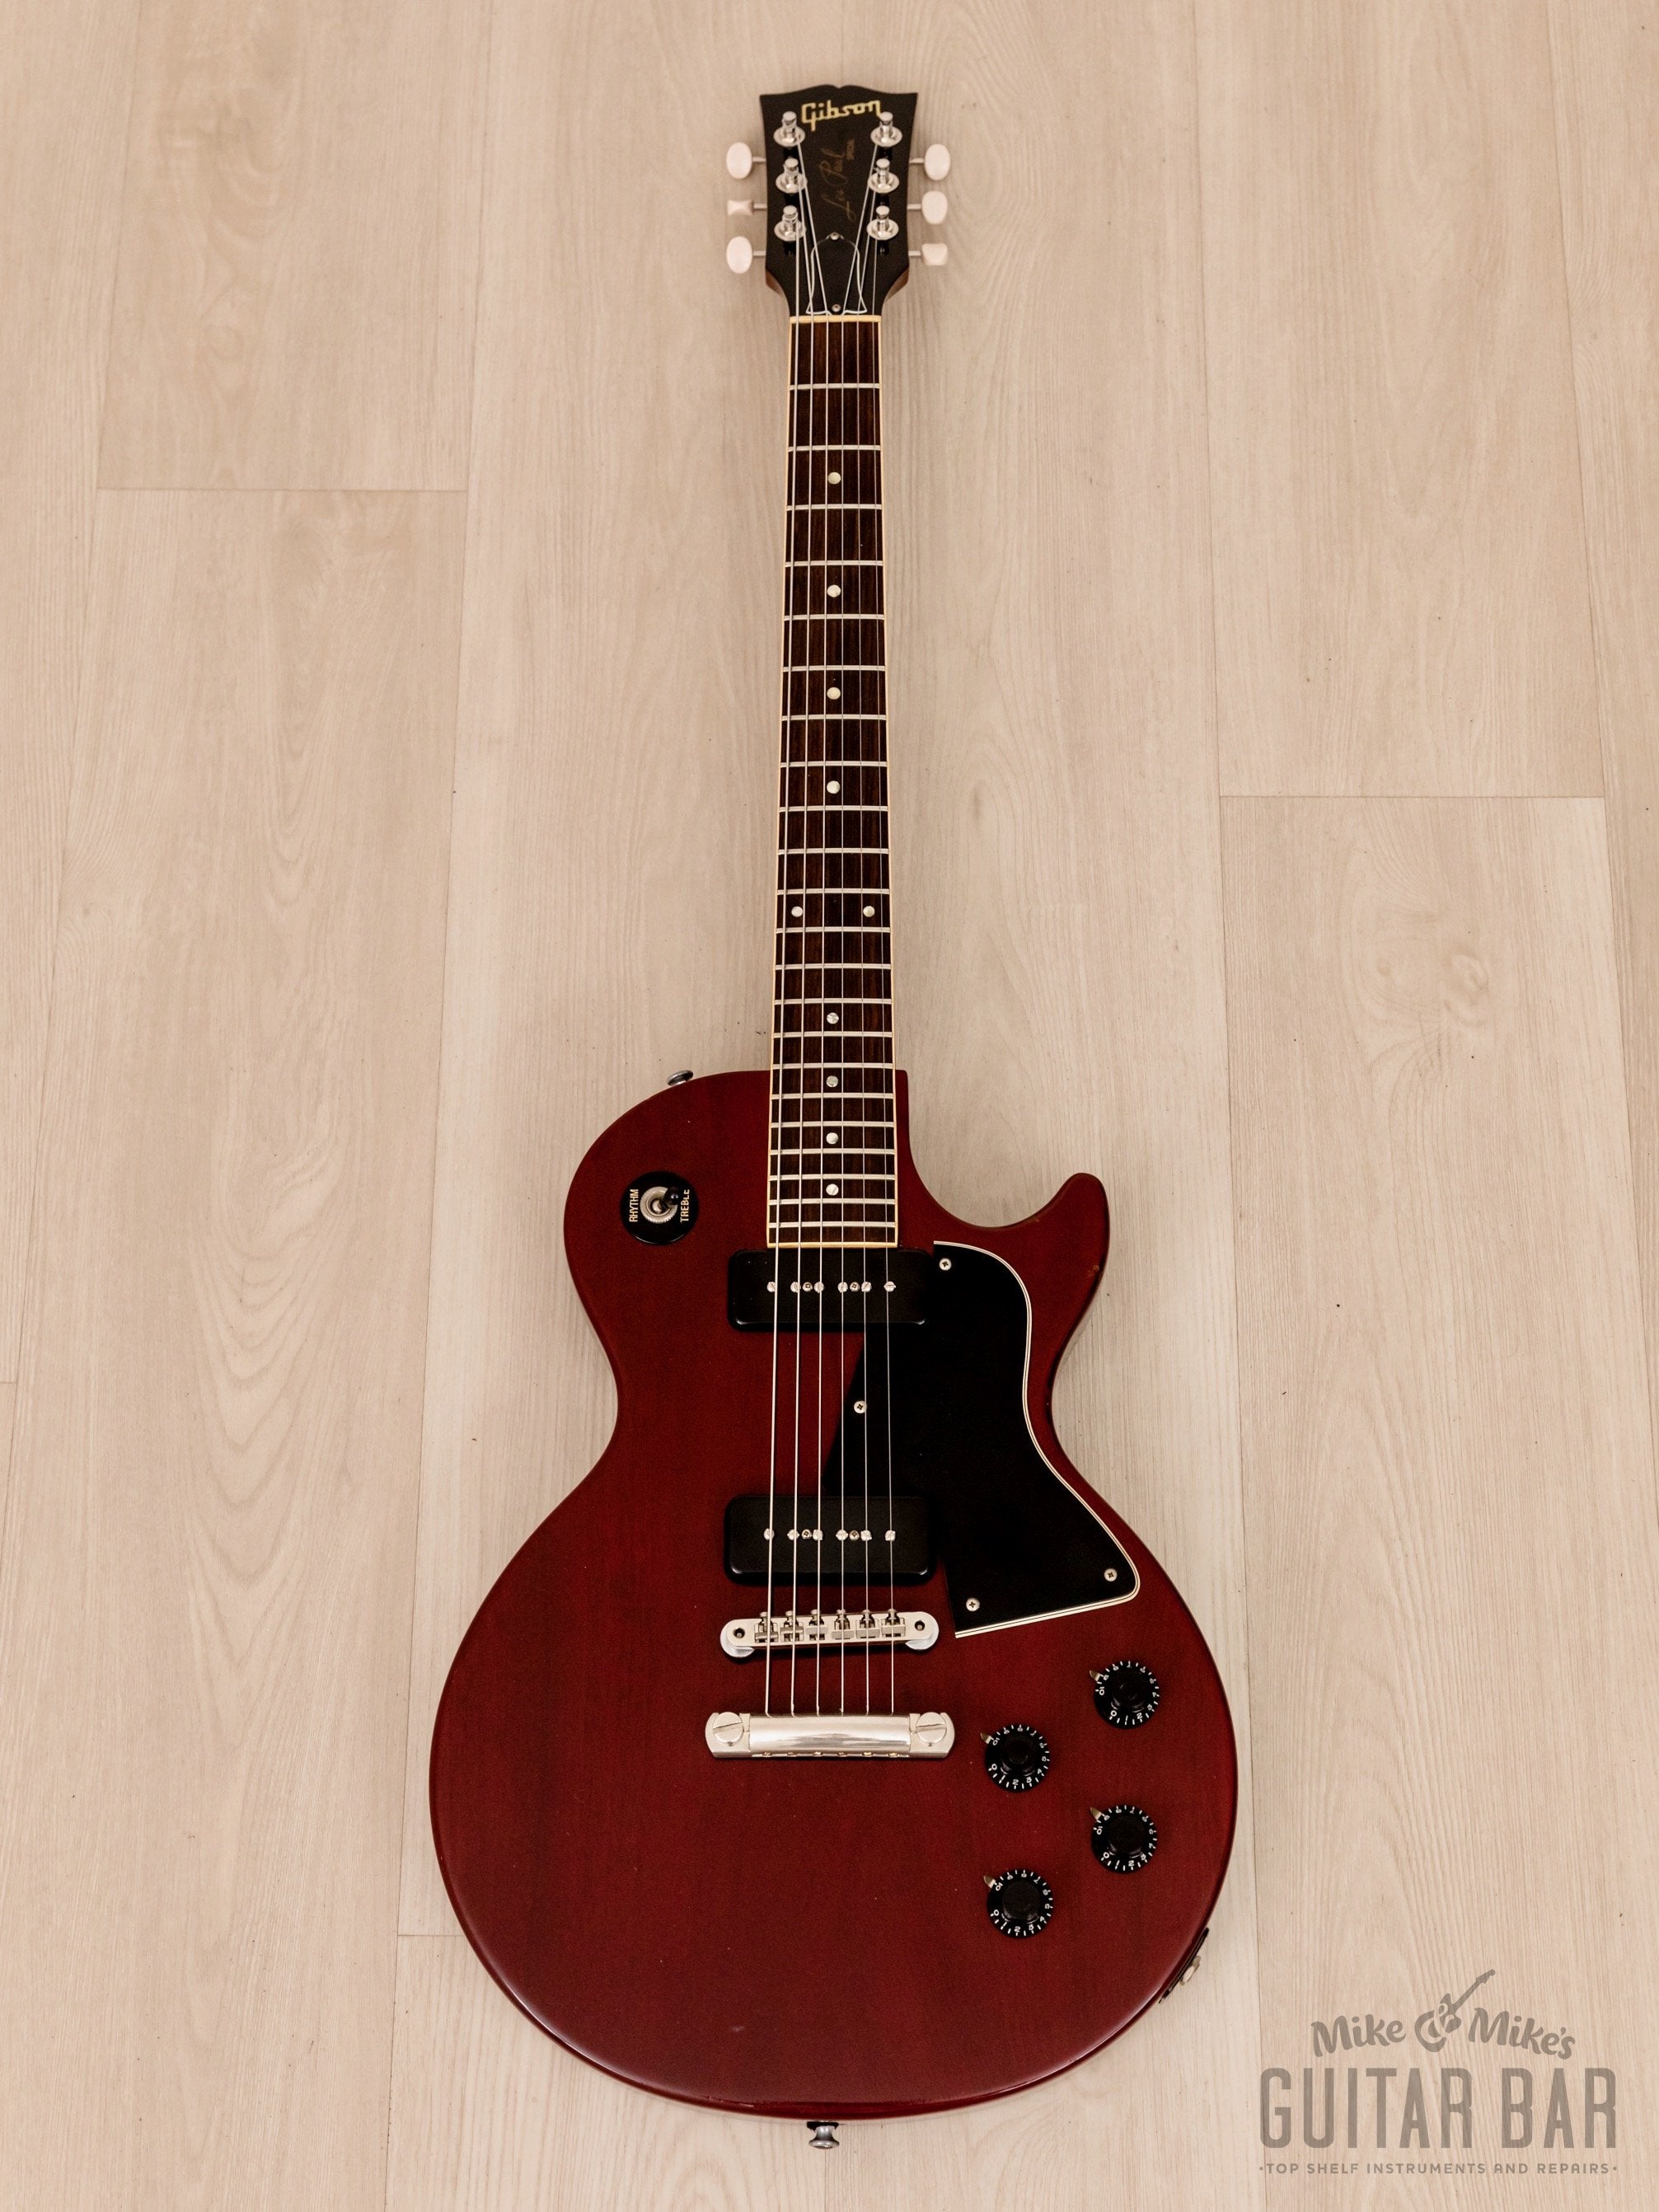 1989 Gibson Les Paul Special Electric Guitar Wine Red Gloss w/ Lollar P-90s, Case